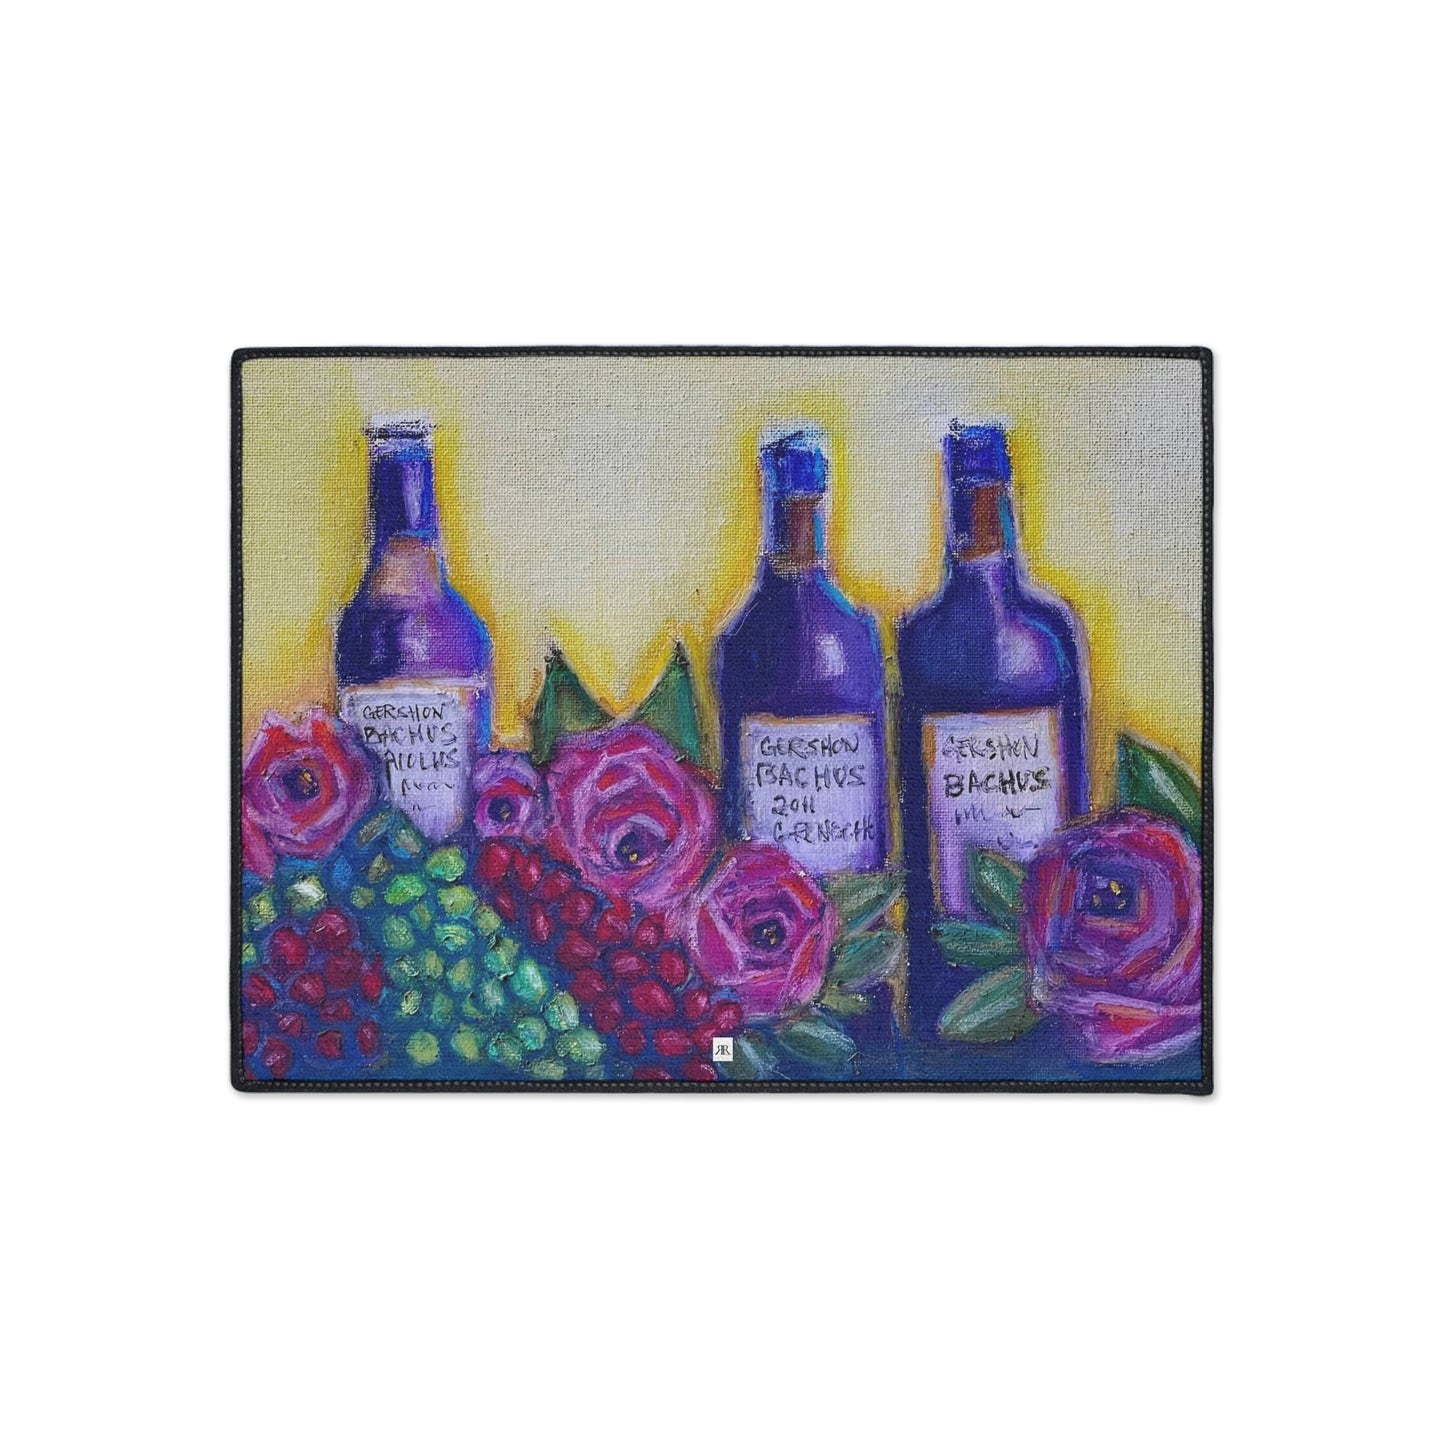 GBV Wine and Roses Heavy Duty Floor Mat